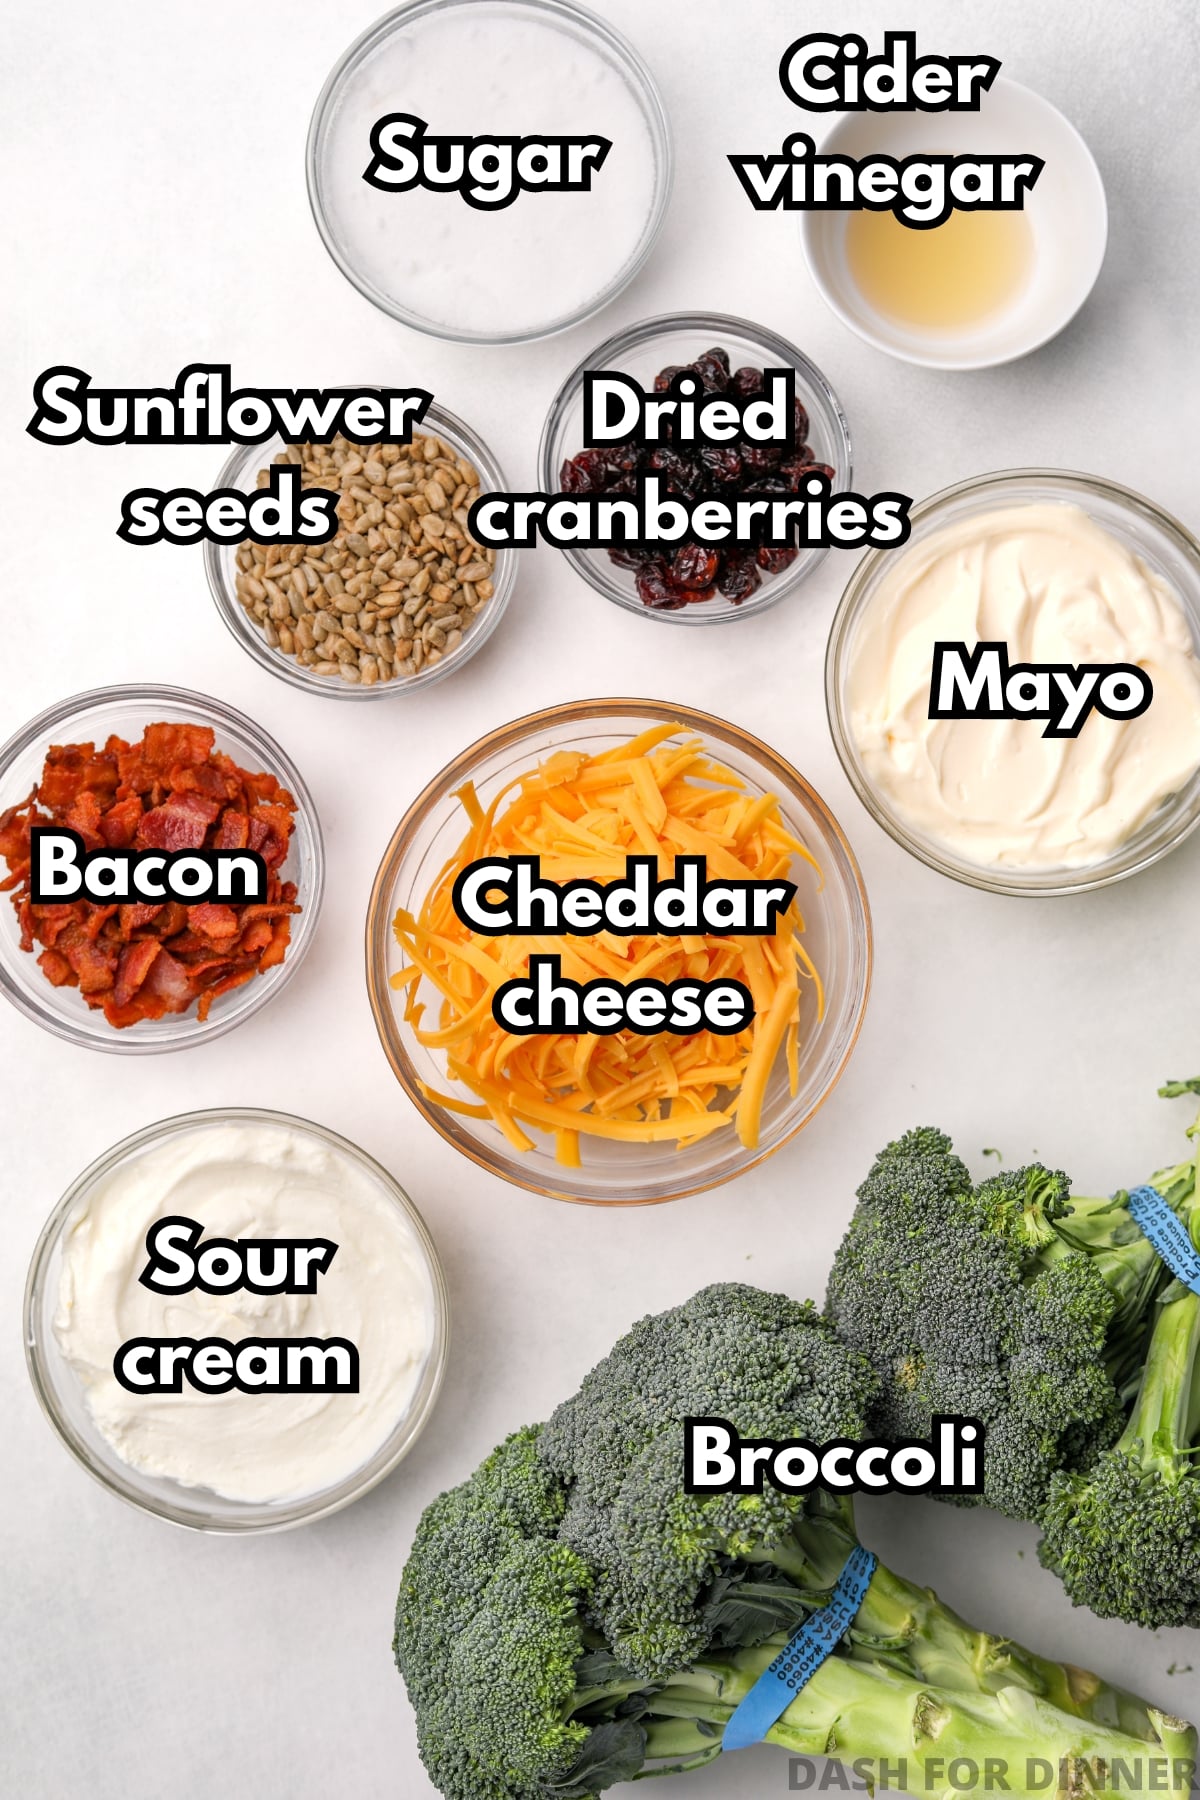 The ingredients needed to make broccoli salad, including cheddar cheese, bacon, sour cream, and mayo.